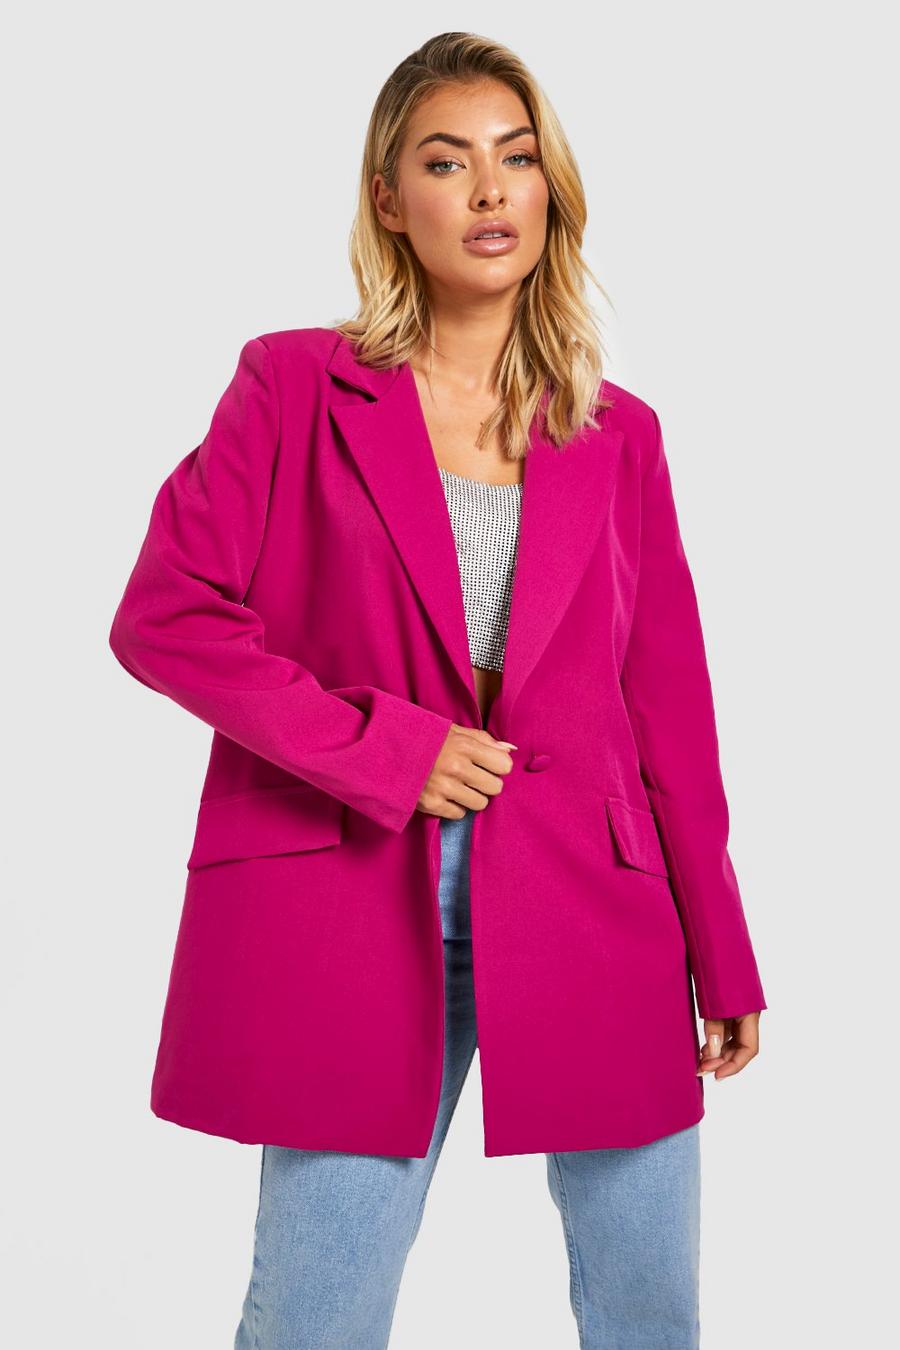 Magenta Color Pop Relaxed Fit Tailored Blazer image number 1